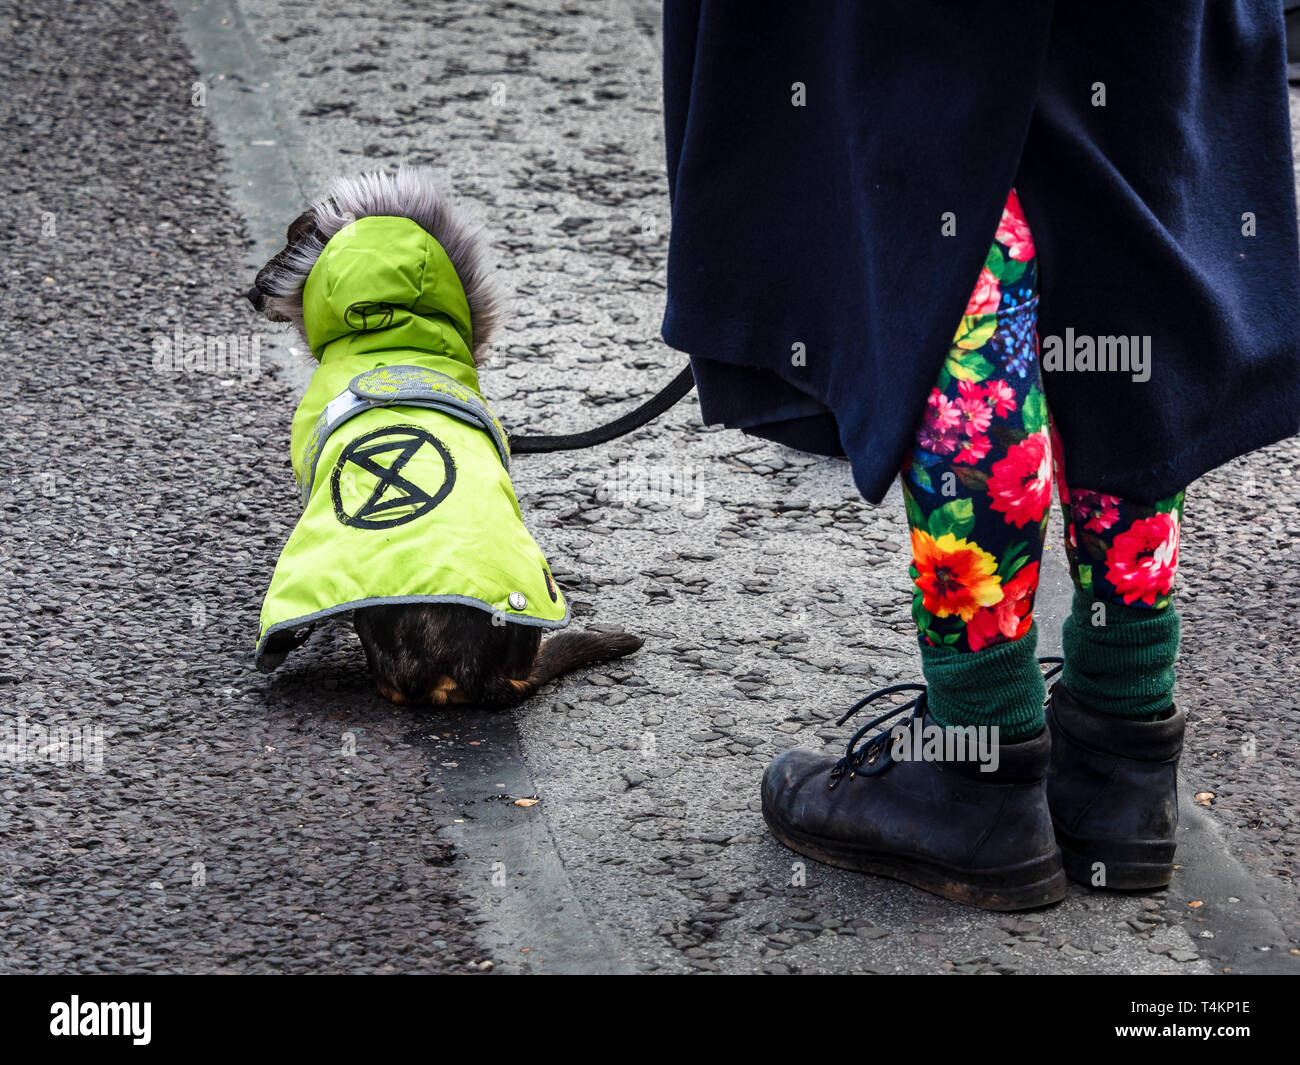 Extinction Rebellion Dog - A dog joins in the Extinction Rebellion non violent protests on Waterloo Bridge. Stock Photo